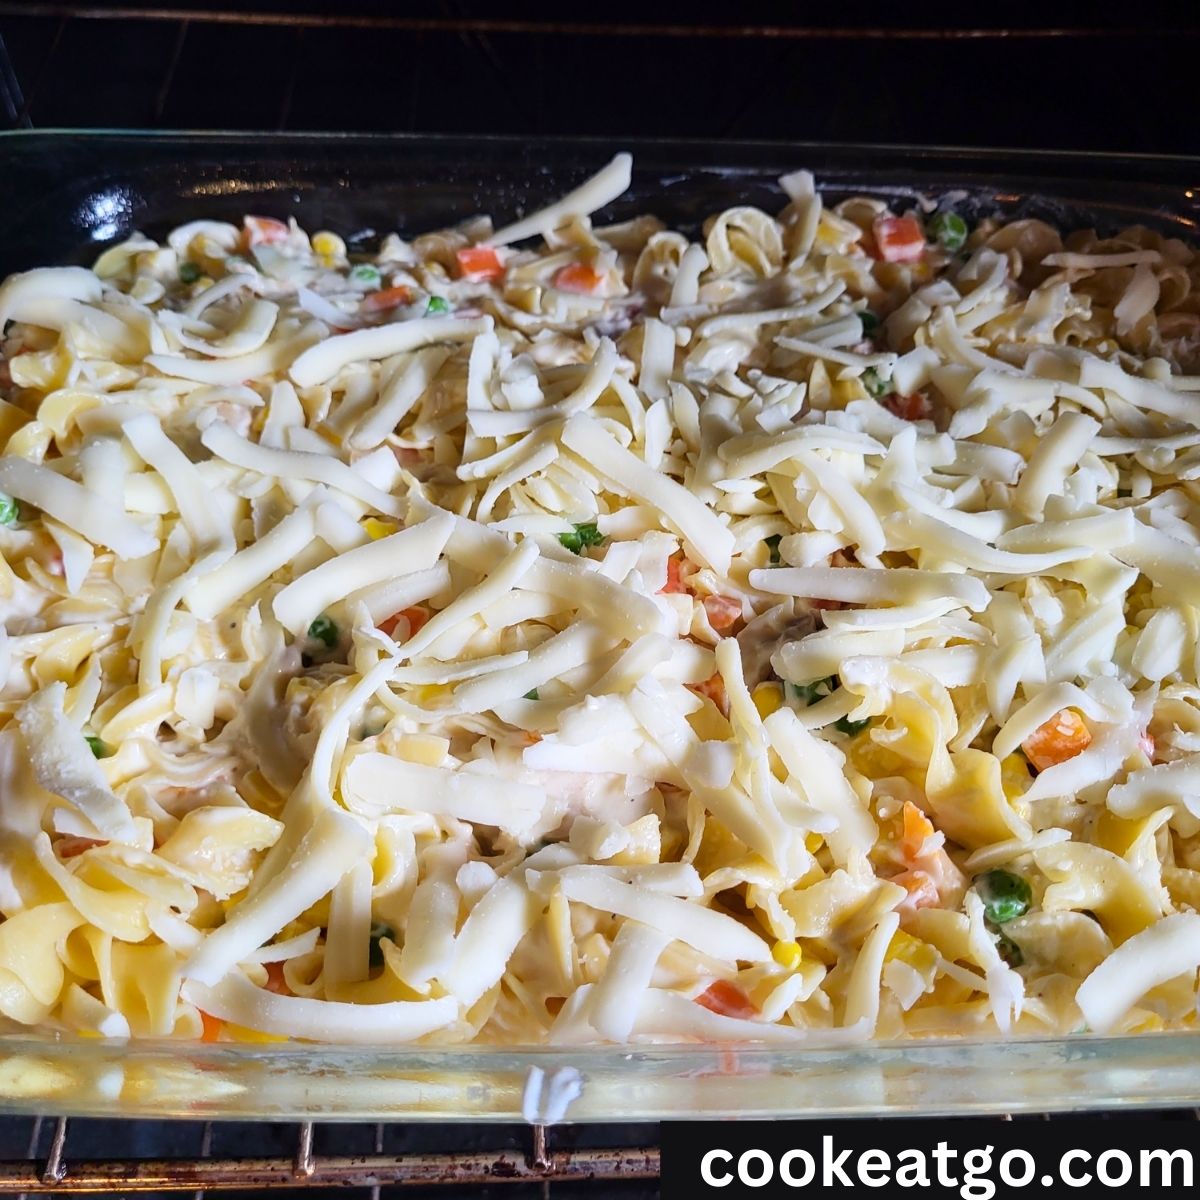 Turkey Noodle Casserole in oven topped with mozzarella cheese